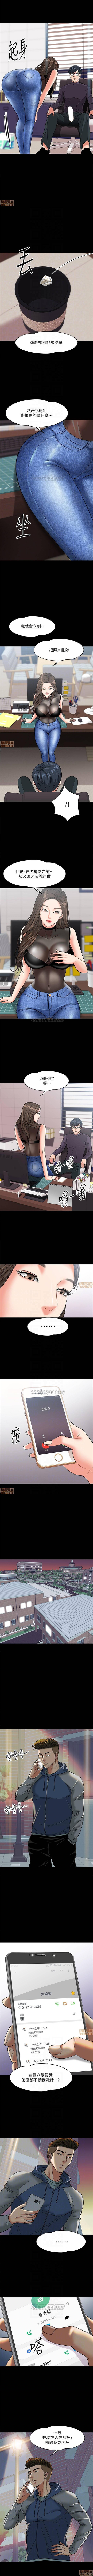 PROFESSOR, ARE YOU JUST GOING TO LOOK AT ME? | DESIRE SWAMP | 教授，你還等什麼? Ch. 5 [Chinese] Manhwa 3